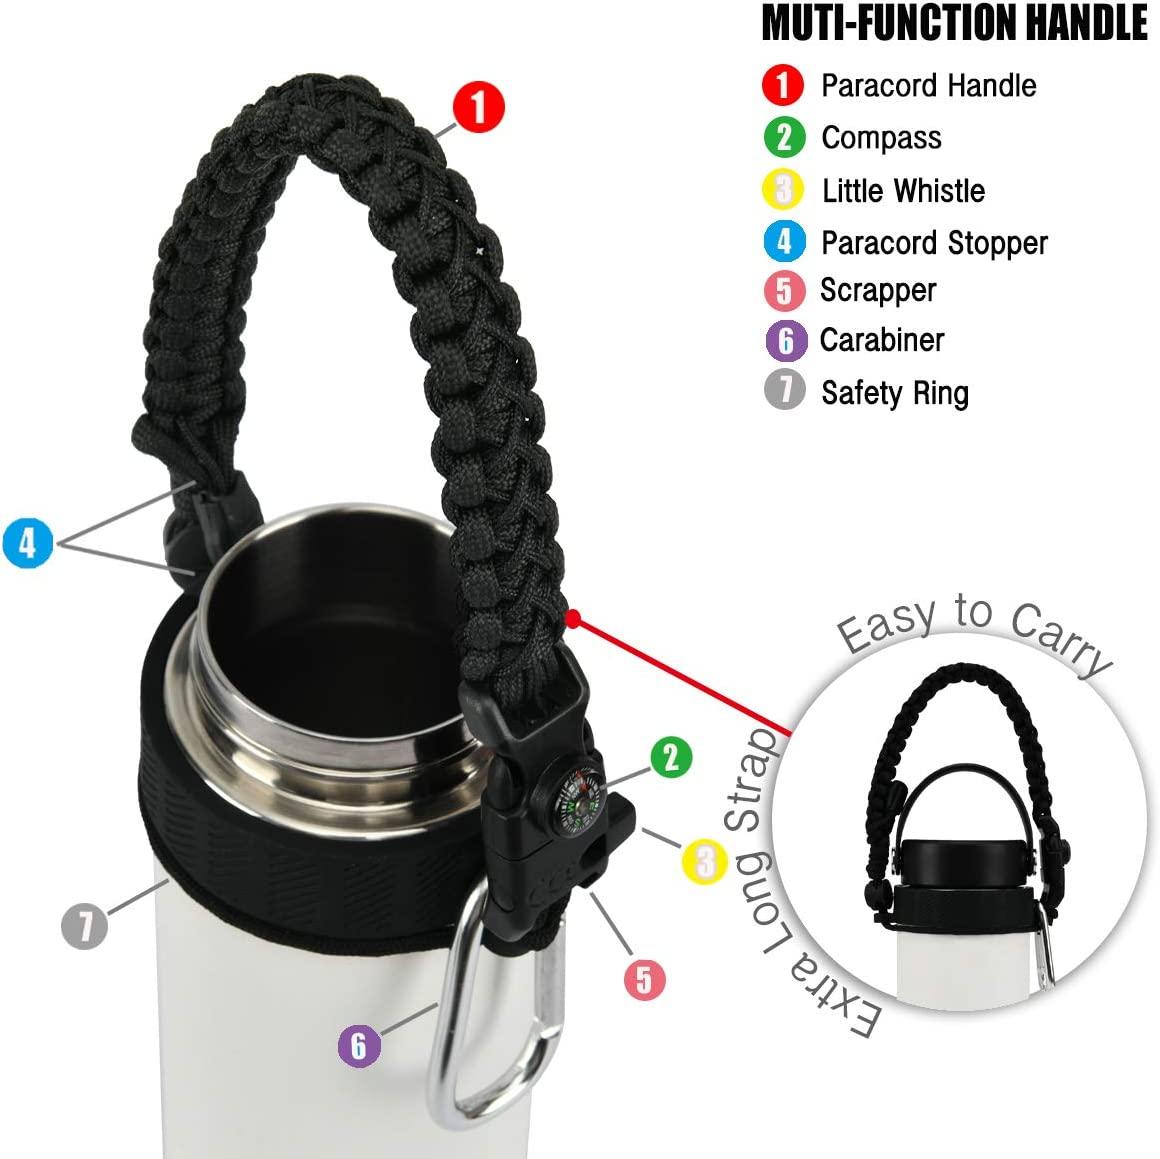 LX-SUNCX Paracord Handle for Hydro Flask 2.0 Wide Mouth Water Bottles(12 to 40oz),Survival Strap Carabiner Carrier Accessories,Plus A Nice